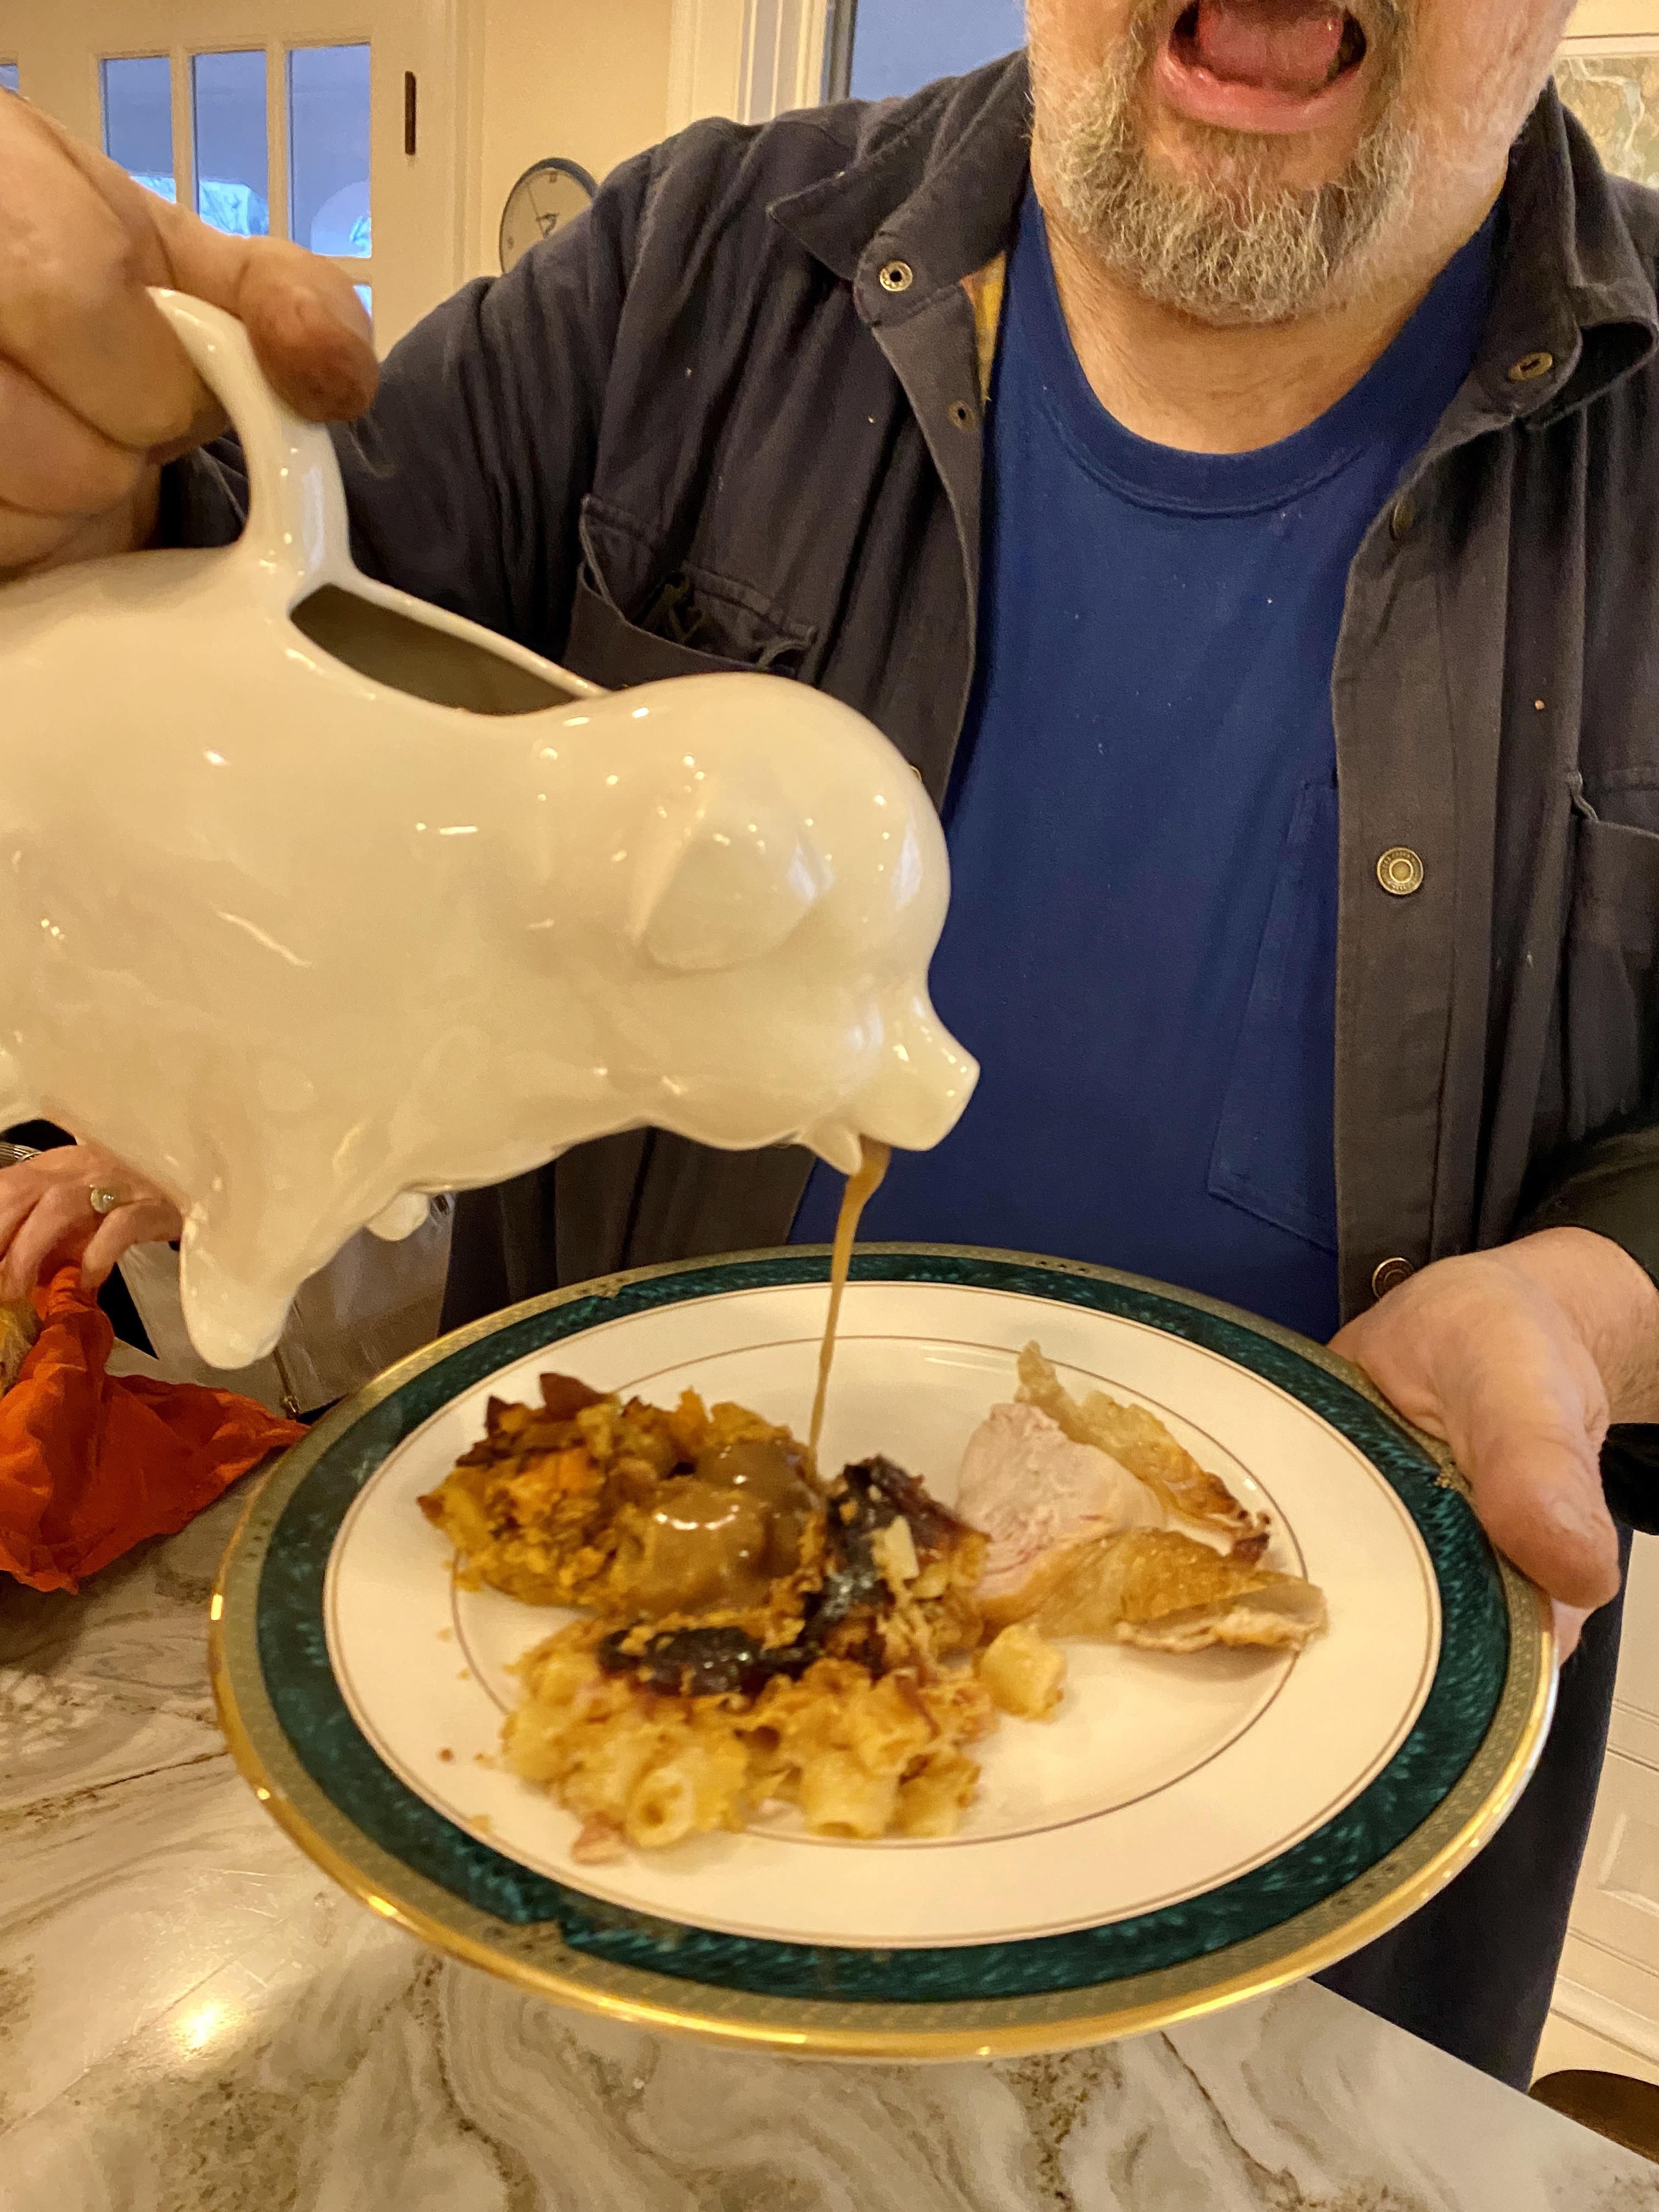 The worlds best gravy boat- the Puking Pig. My dad likes to enhance the experience with sound effects whenever it’s used